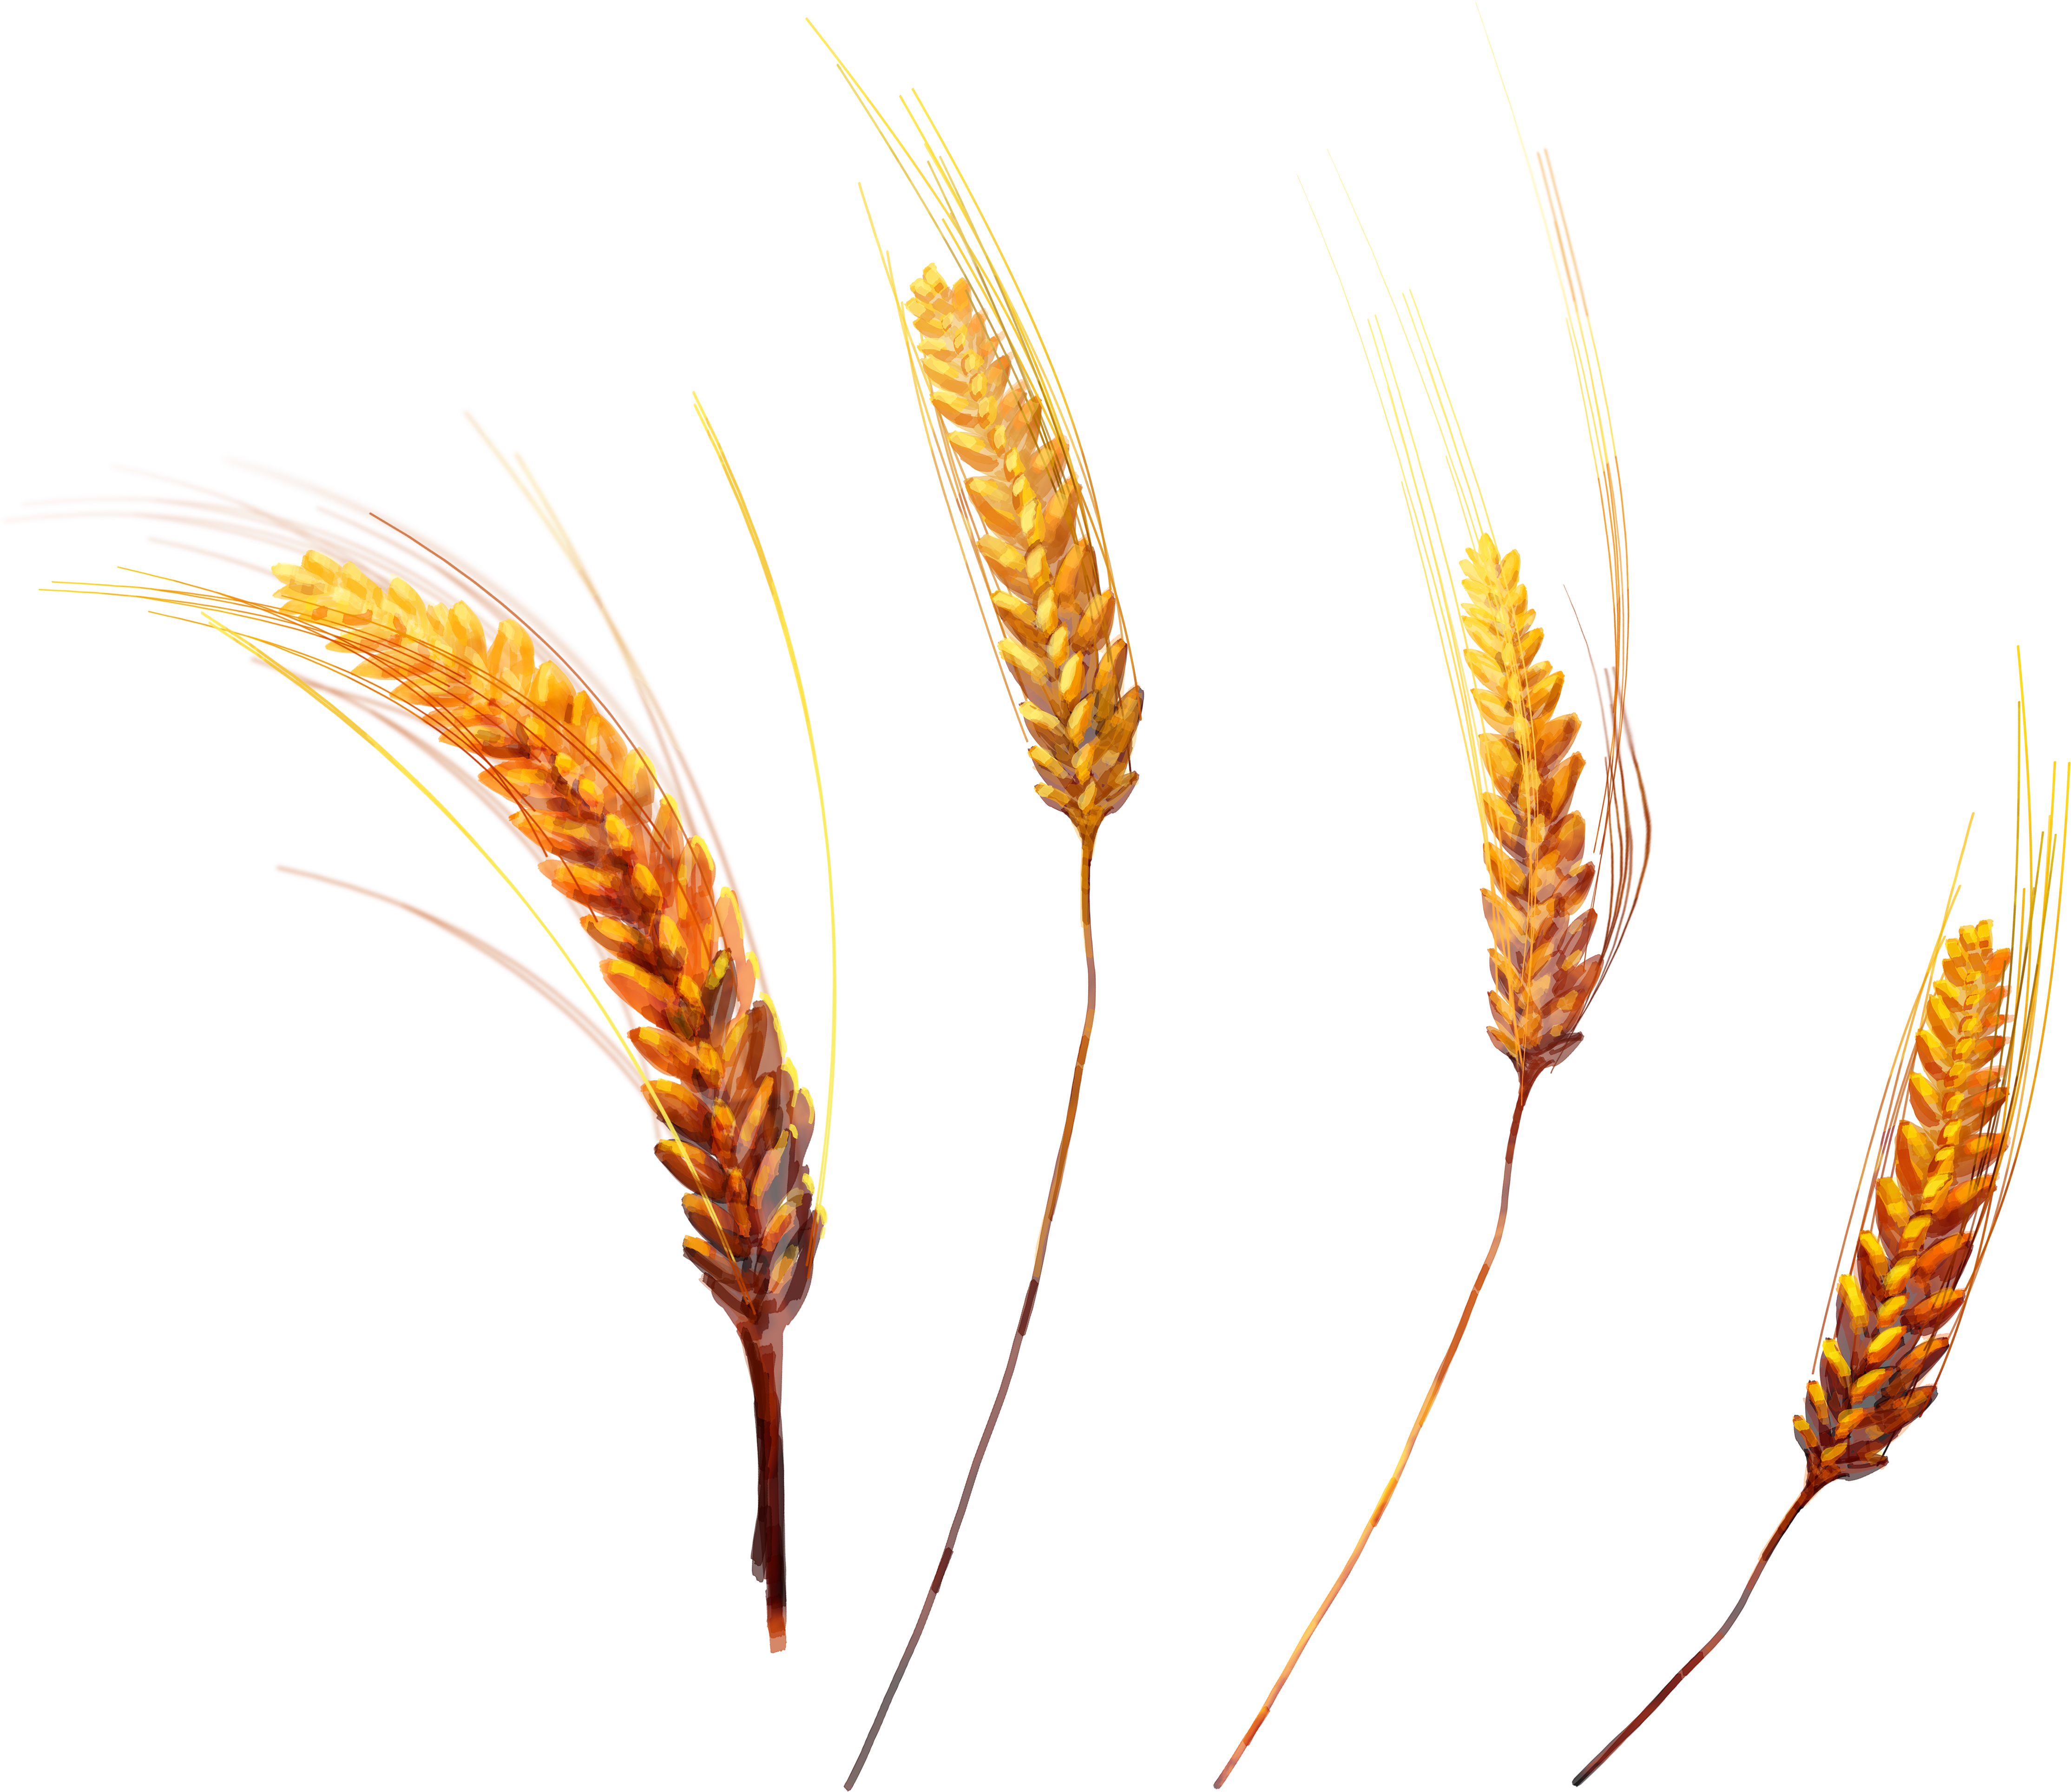 Png image purepng free. Wheat clipart wheat leaf